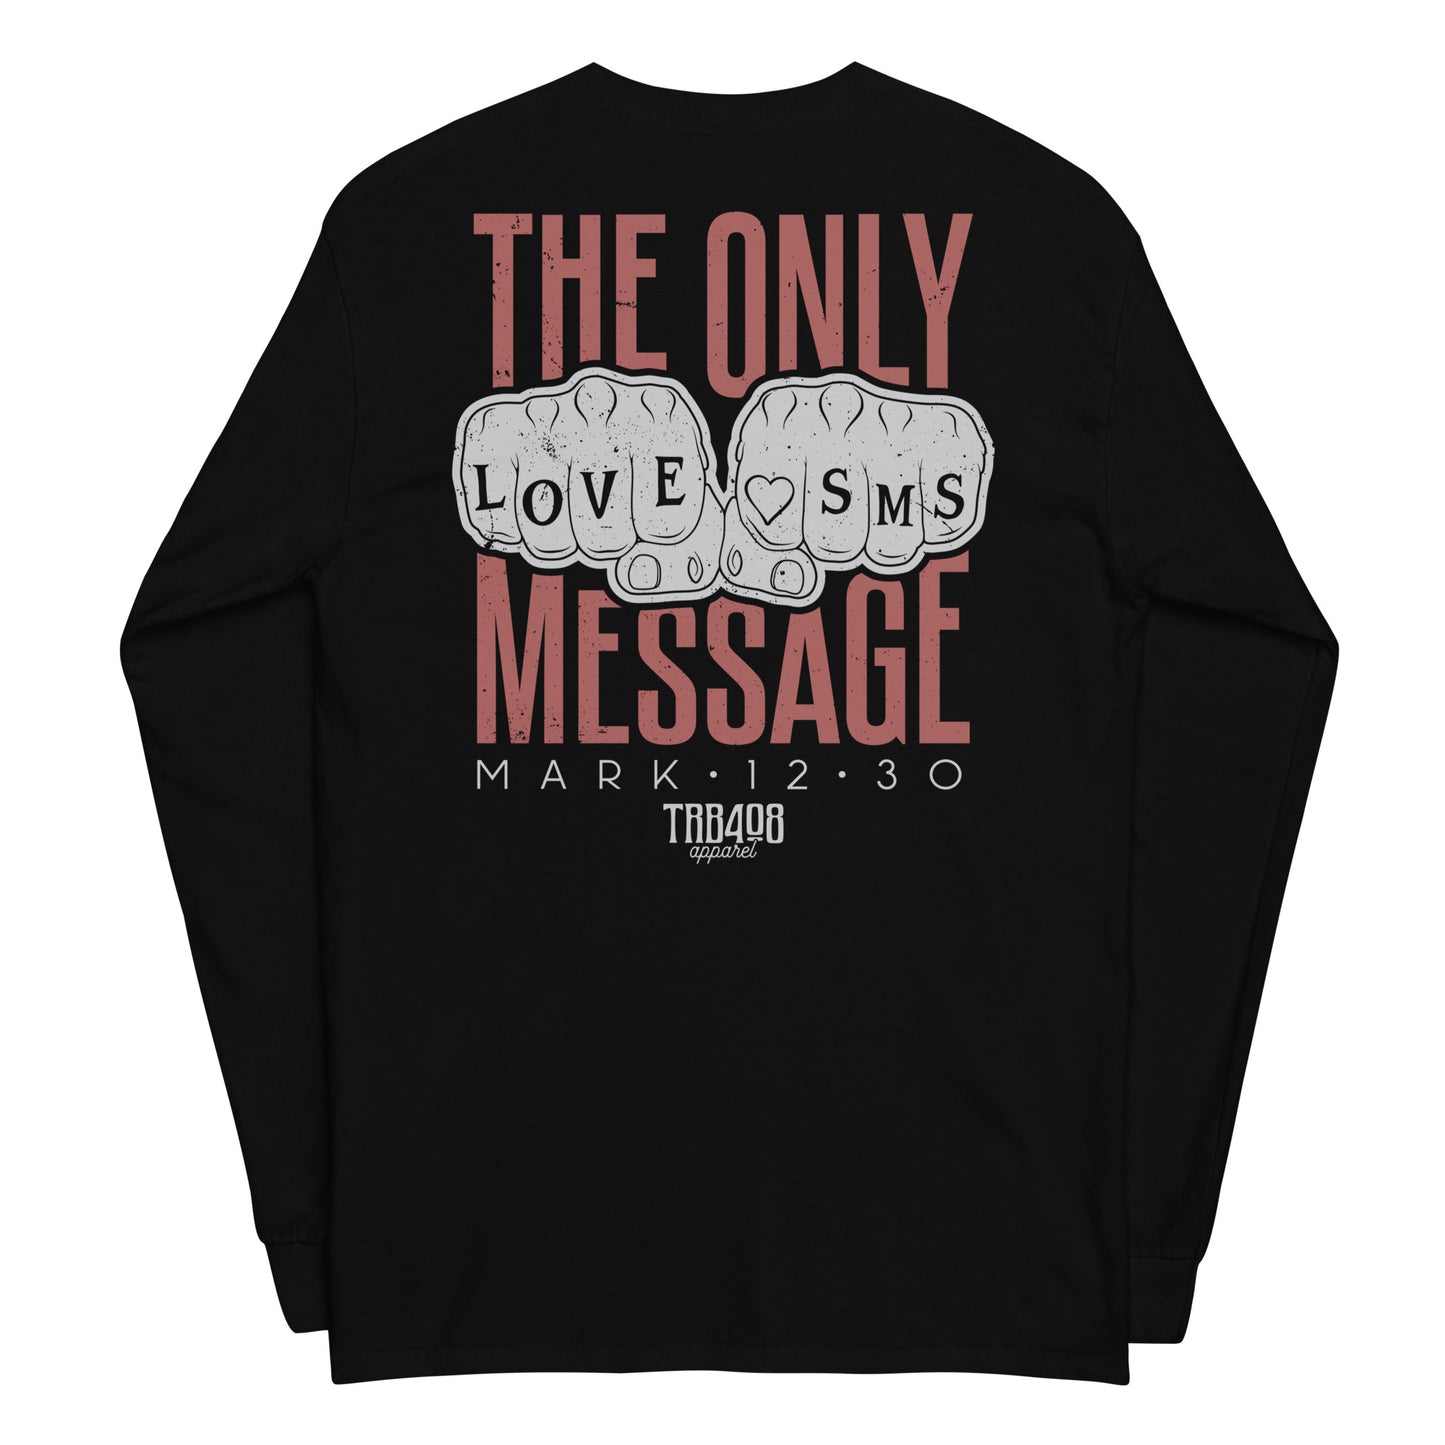 The LOVE MESSAGE Tee